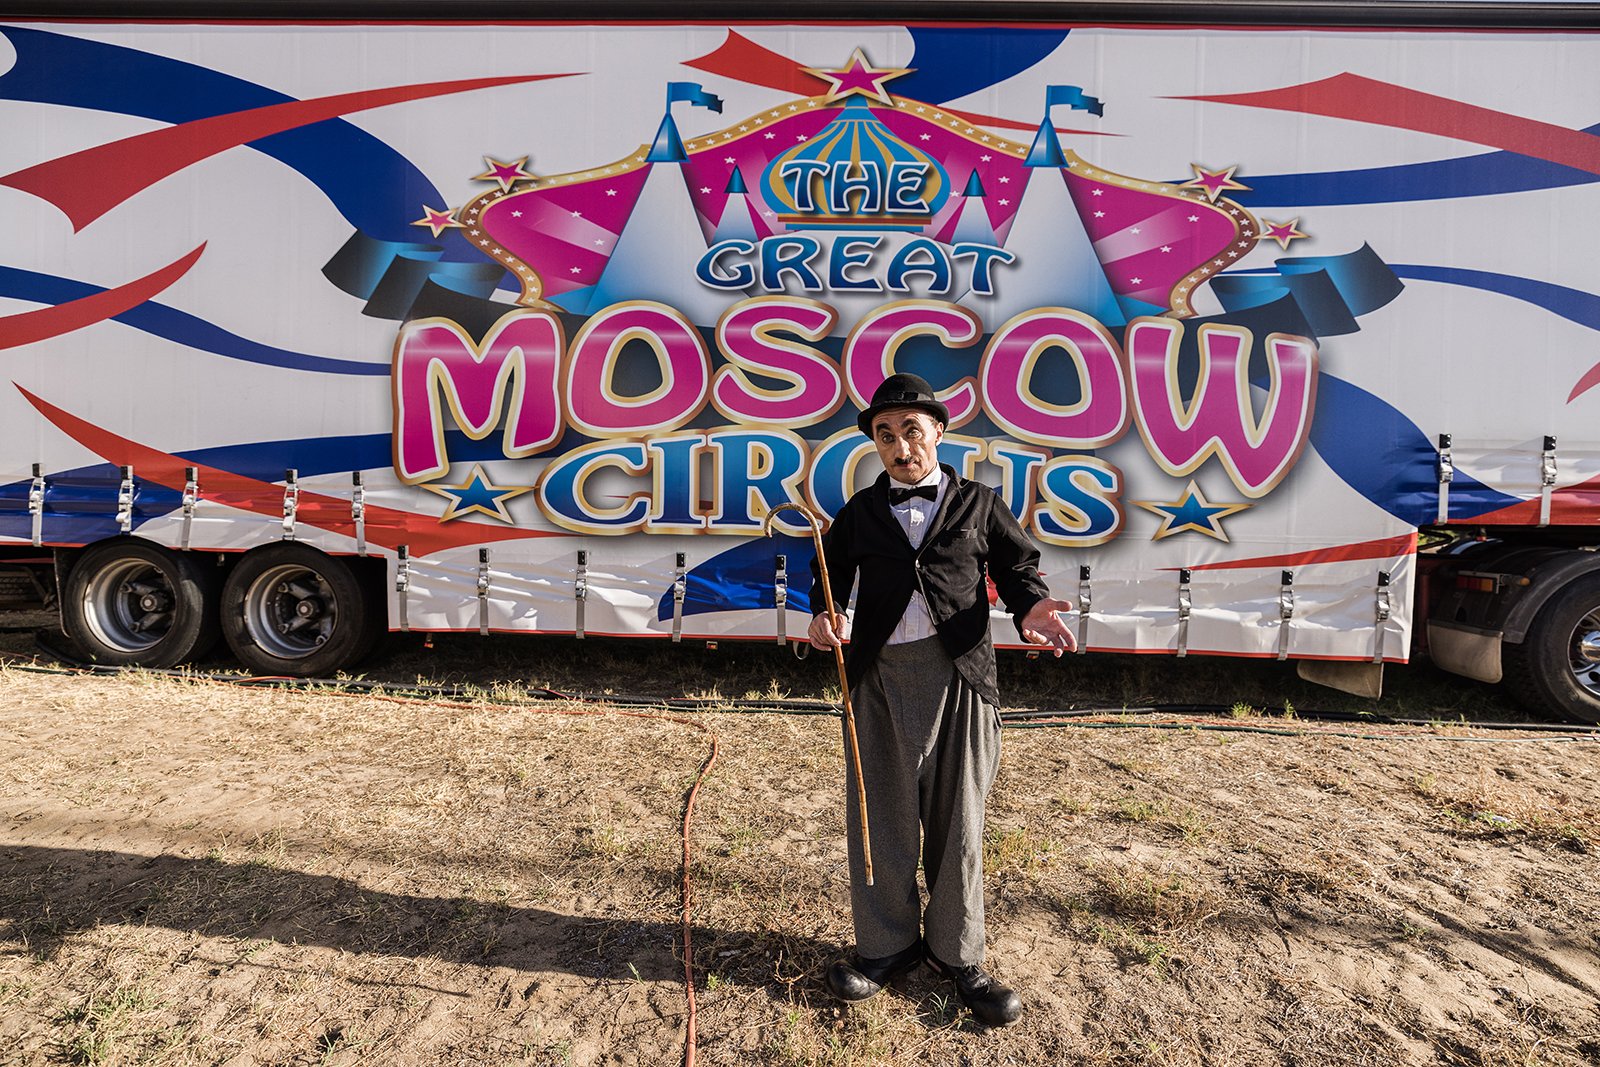  Gagik Avetisyan in front of circus signange. In 2022, The Great Moscow Circus  had 272 shows in 20 Towns across 3 States and travelled more than 9200km. 